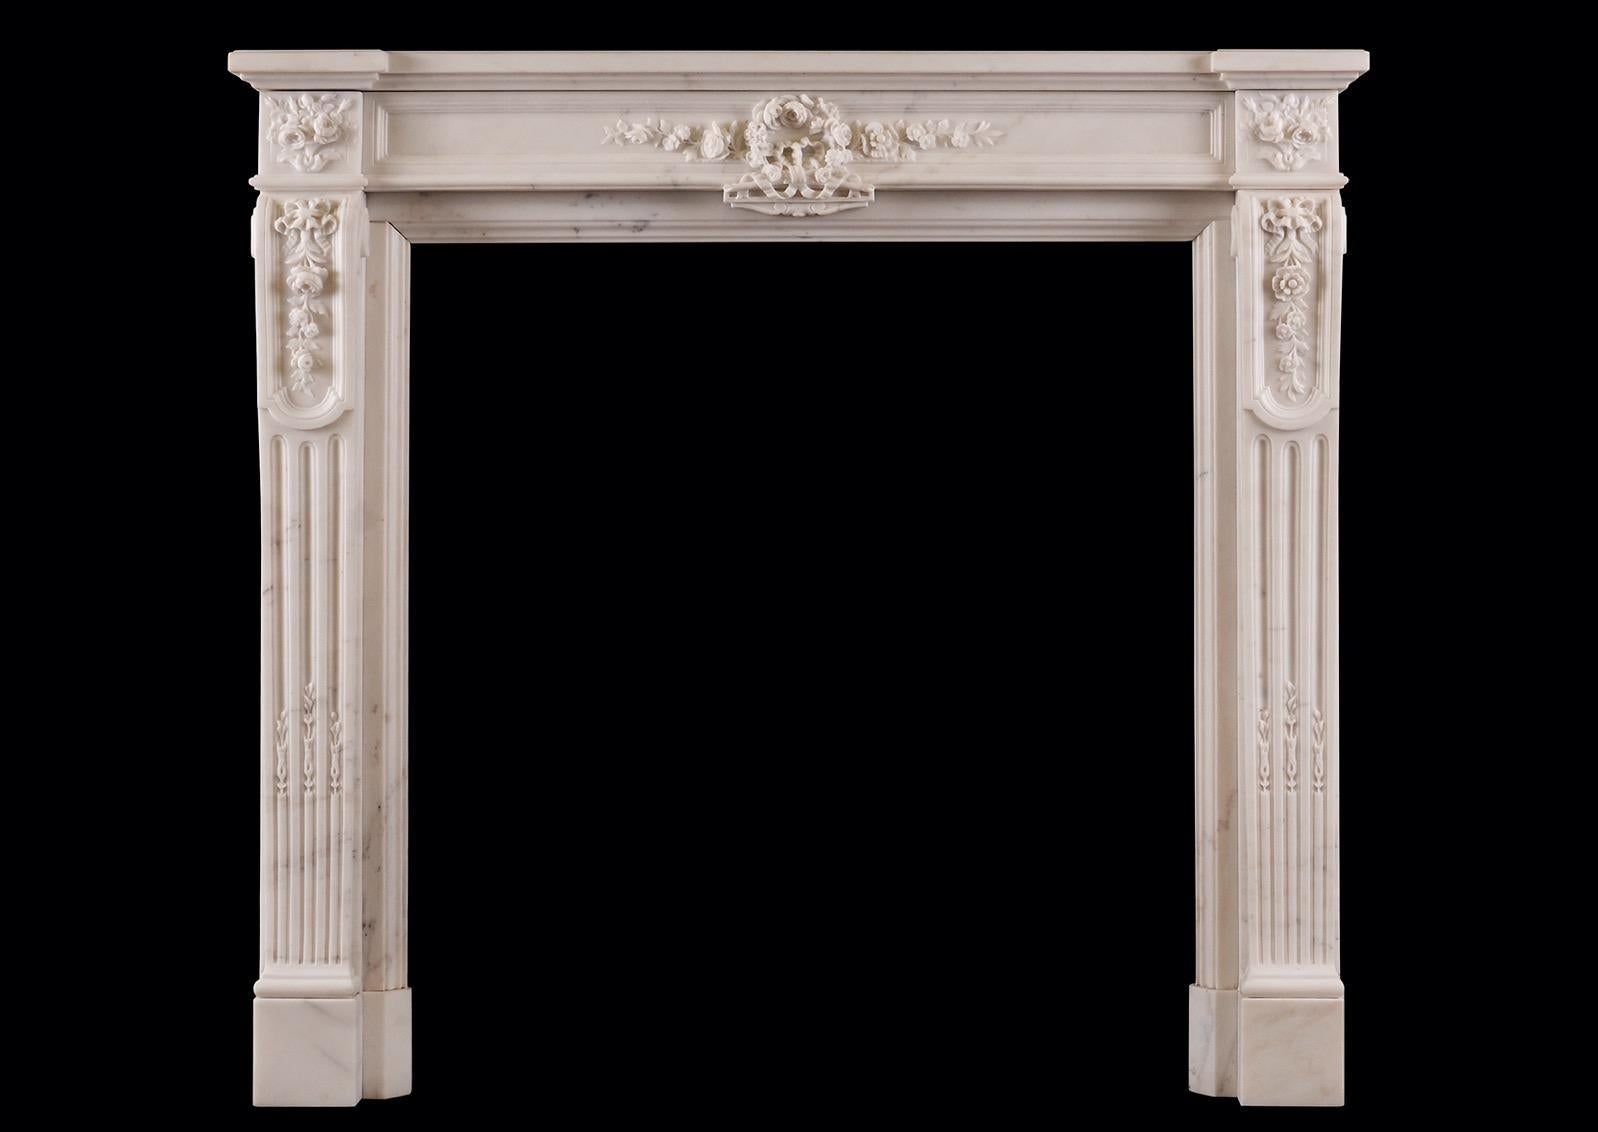 A 19th century French Statuary white marble fireplace in the Louis XVI style. The fluted jabs with carved husks, surmounted by panels carved with ribbons and foliage. The panelled frieze with carved flowers and foliage t centre, flanked by carved